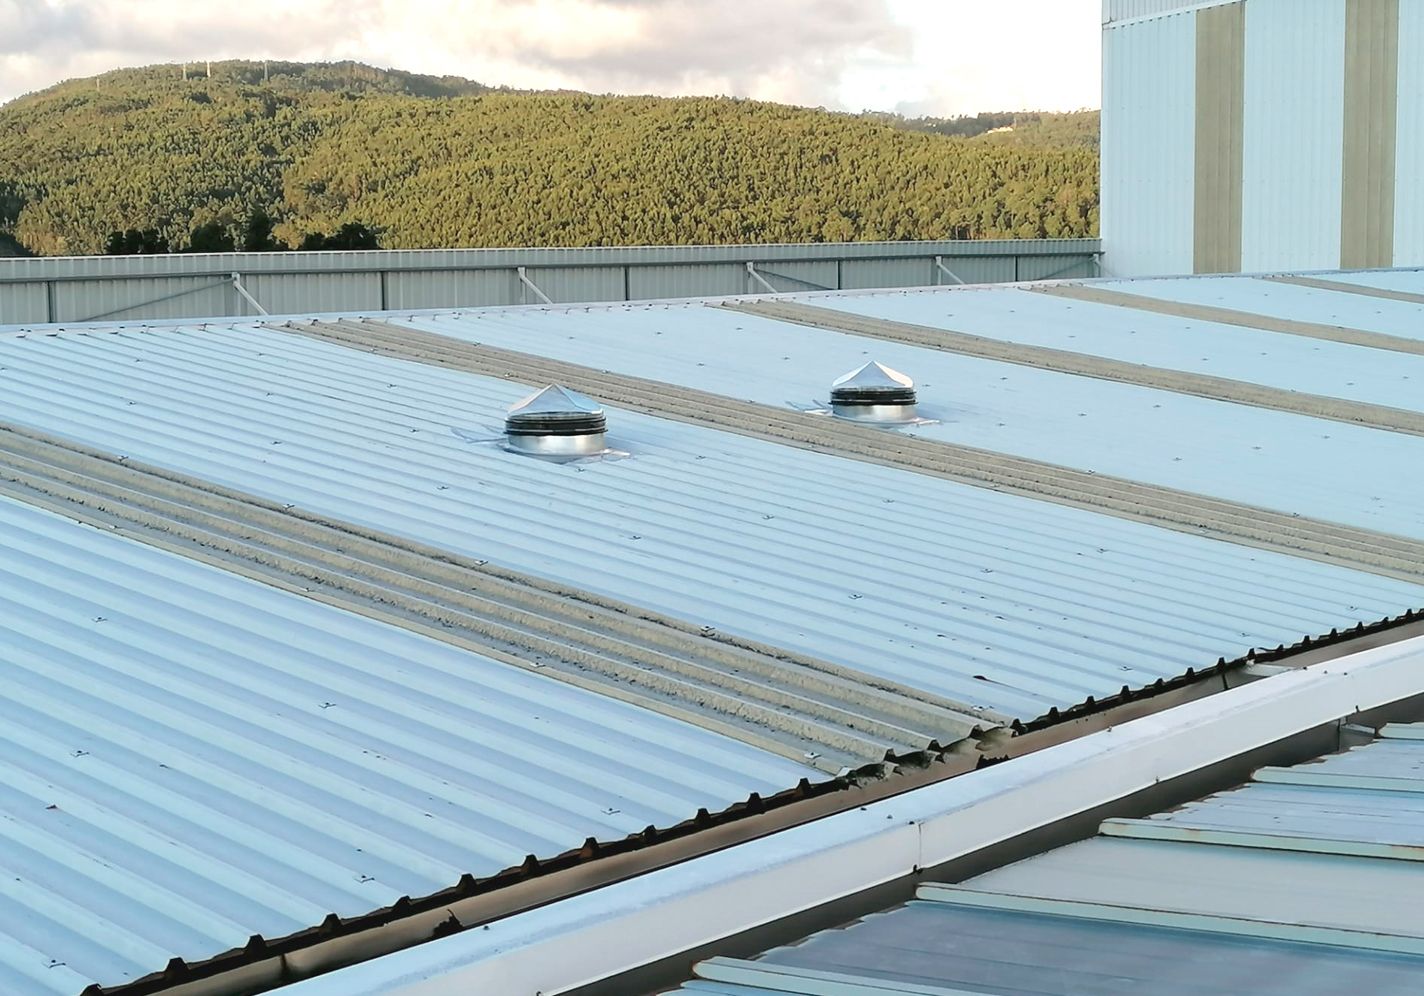 Example of industrial or residential commercial solar tube installation, 013